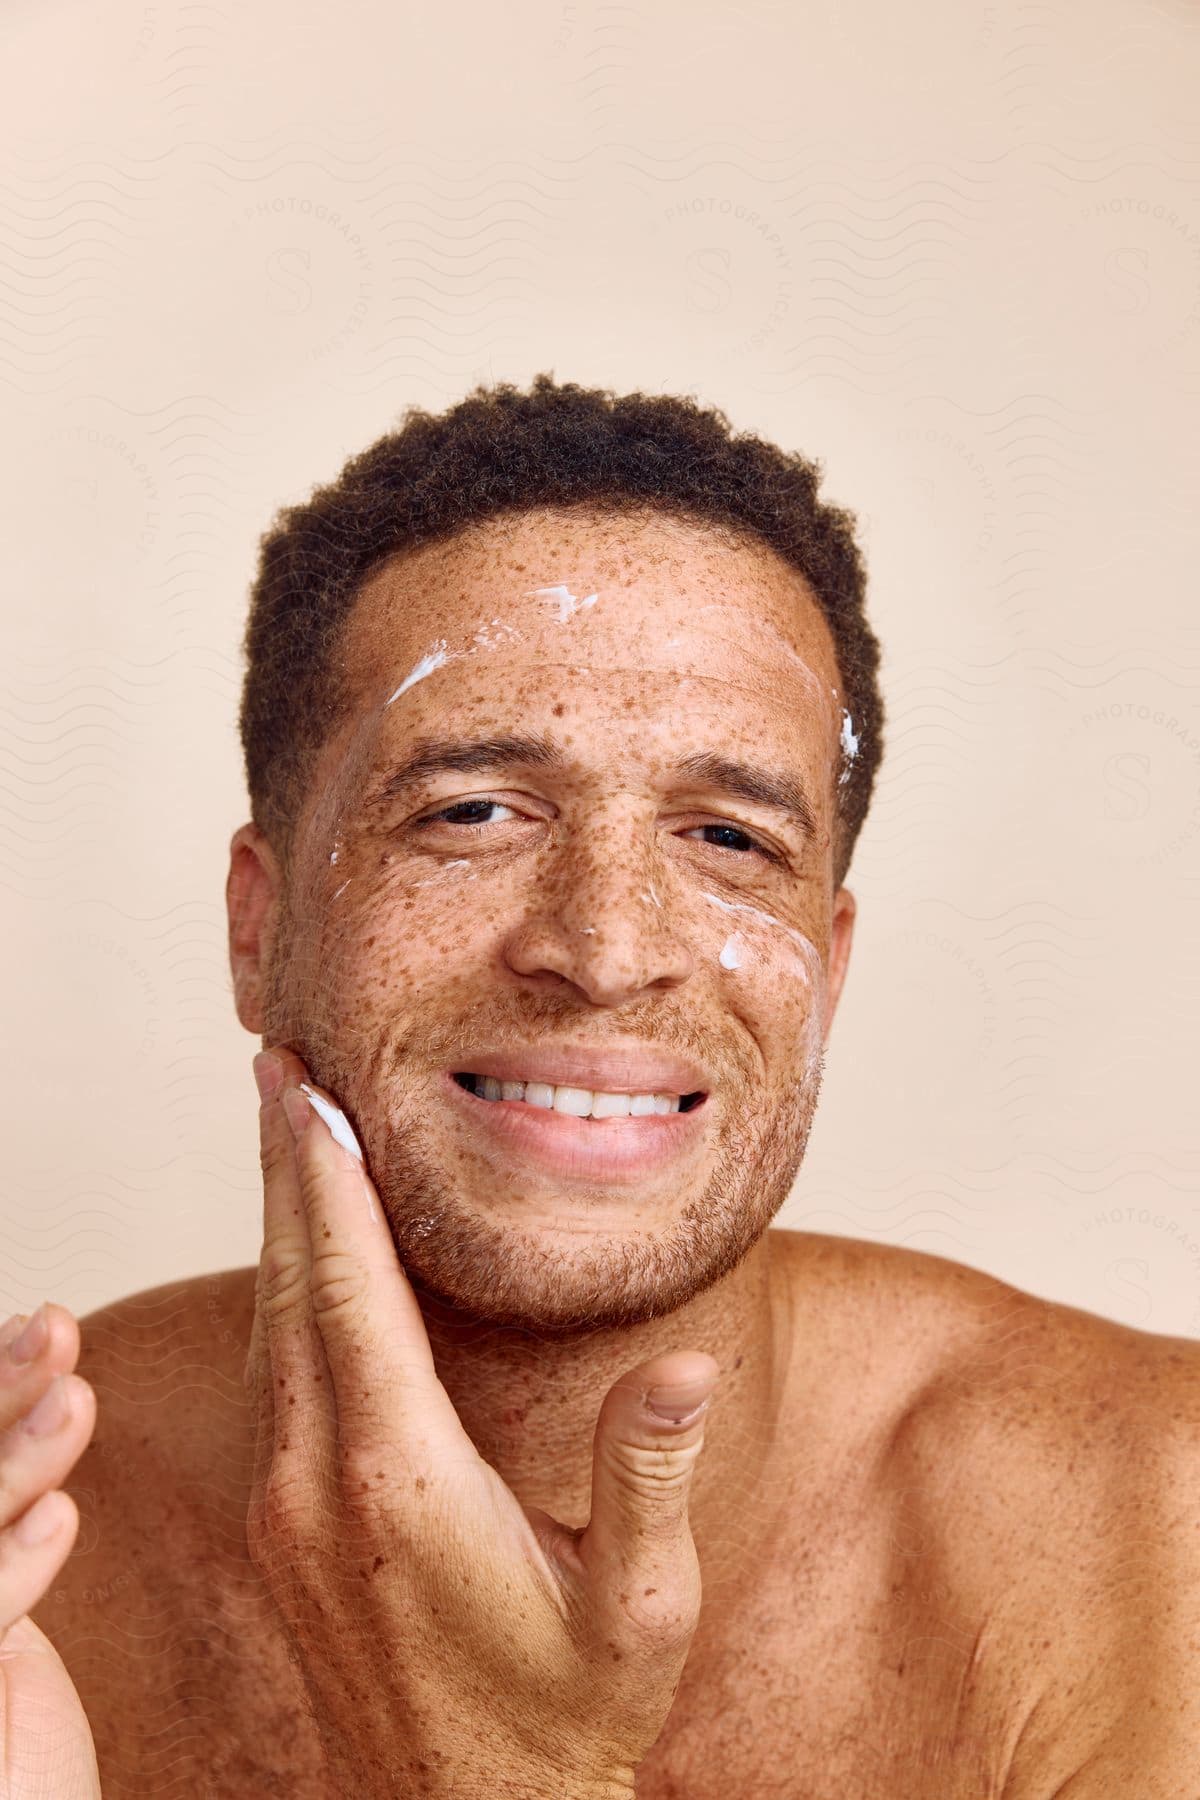 Smiling man applies lotion to face